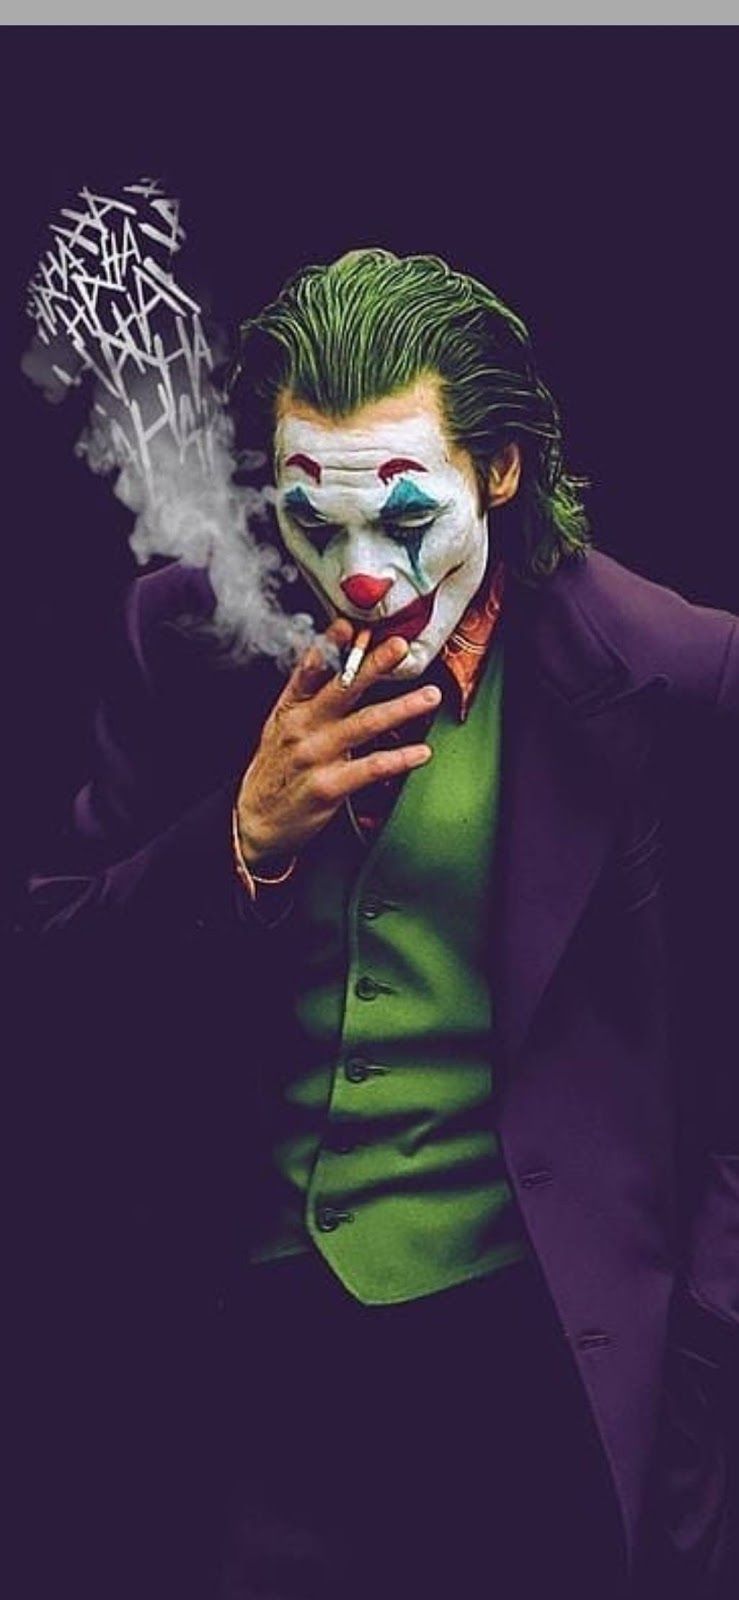 Free download Jocker Full HD Images for mobile and PC background joker  images [739x1600] for your Desktop, Mobile & Tablet | Explore 34+  Background Joker | Joker Backgrounds, Joker Background, Joker Comic  Wallpaper